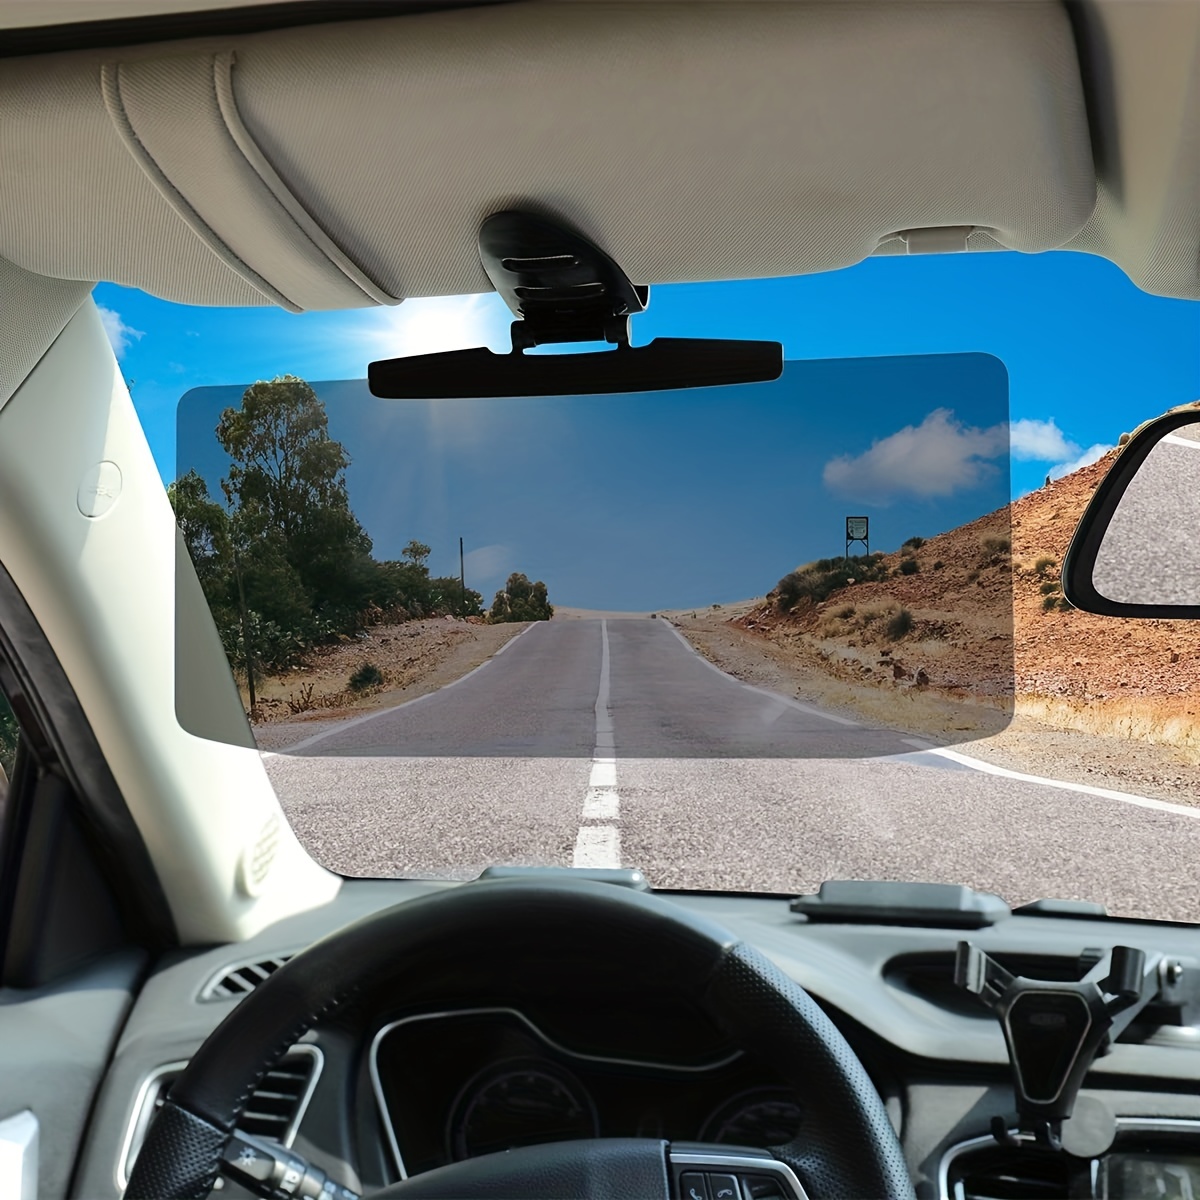 Polarized Sunshade Extender for Car with Polycarbonate Lens